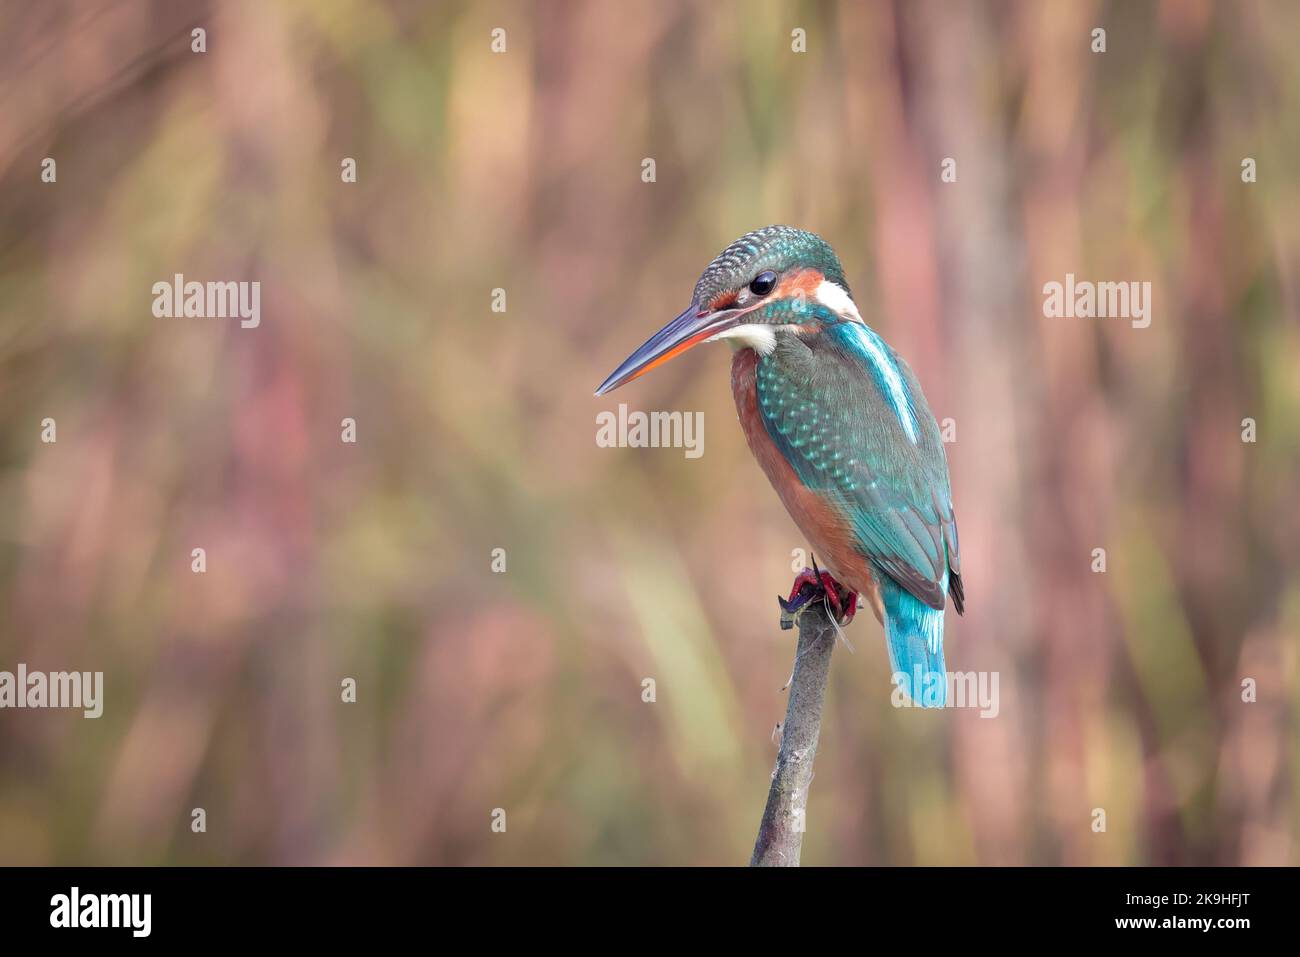 The common kingfisher (Alcedo atthis), also known as the Eurasian kingfisher and river kingfisher. Stock Photo